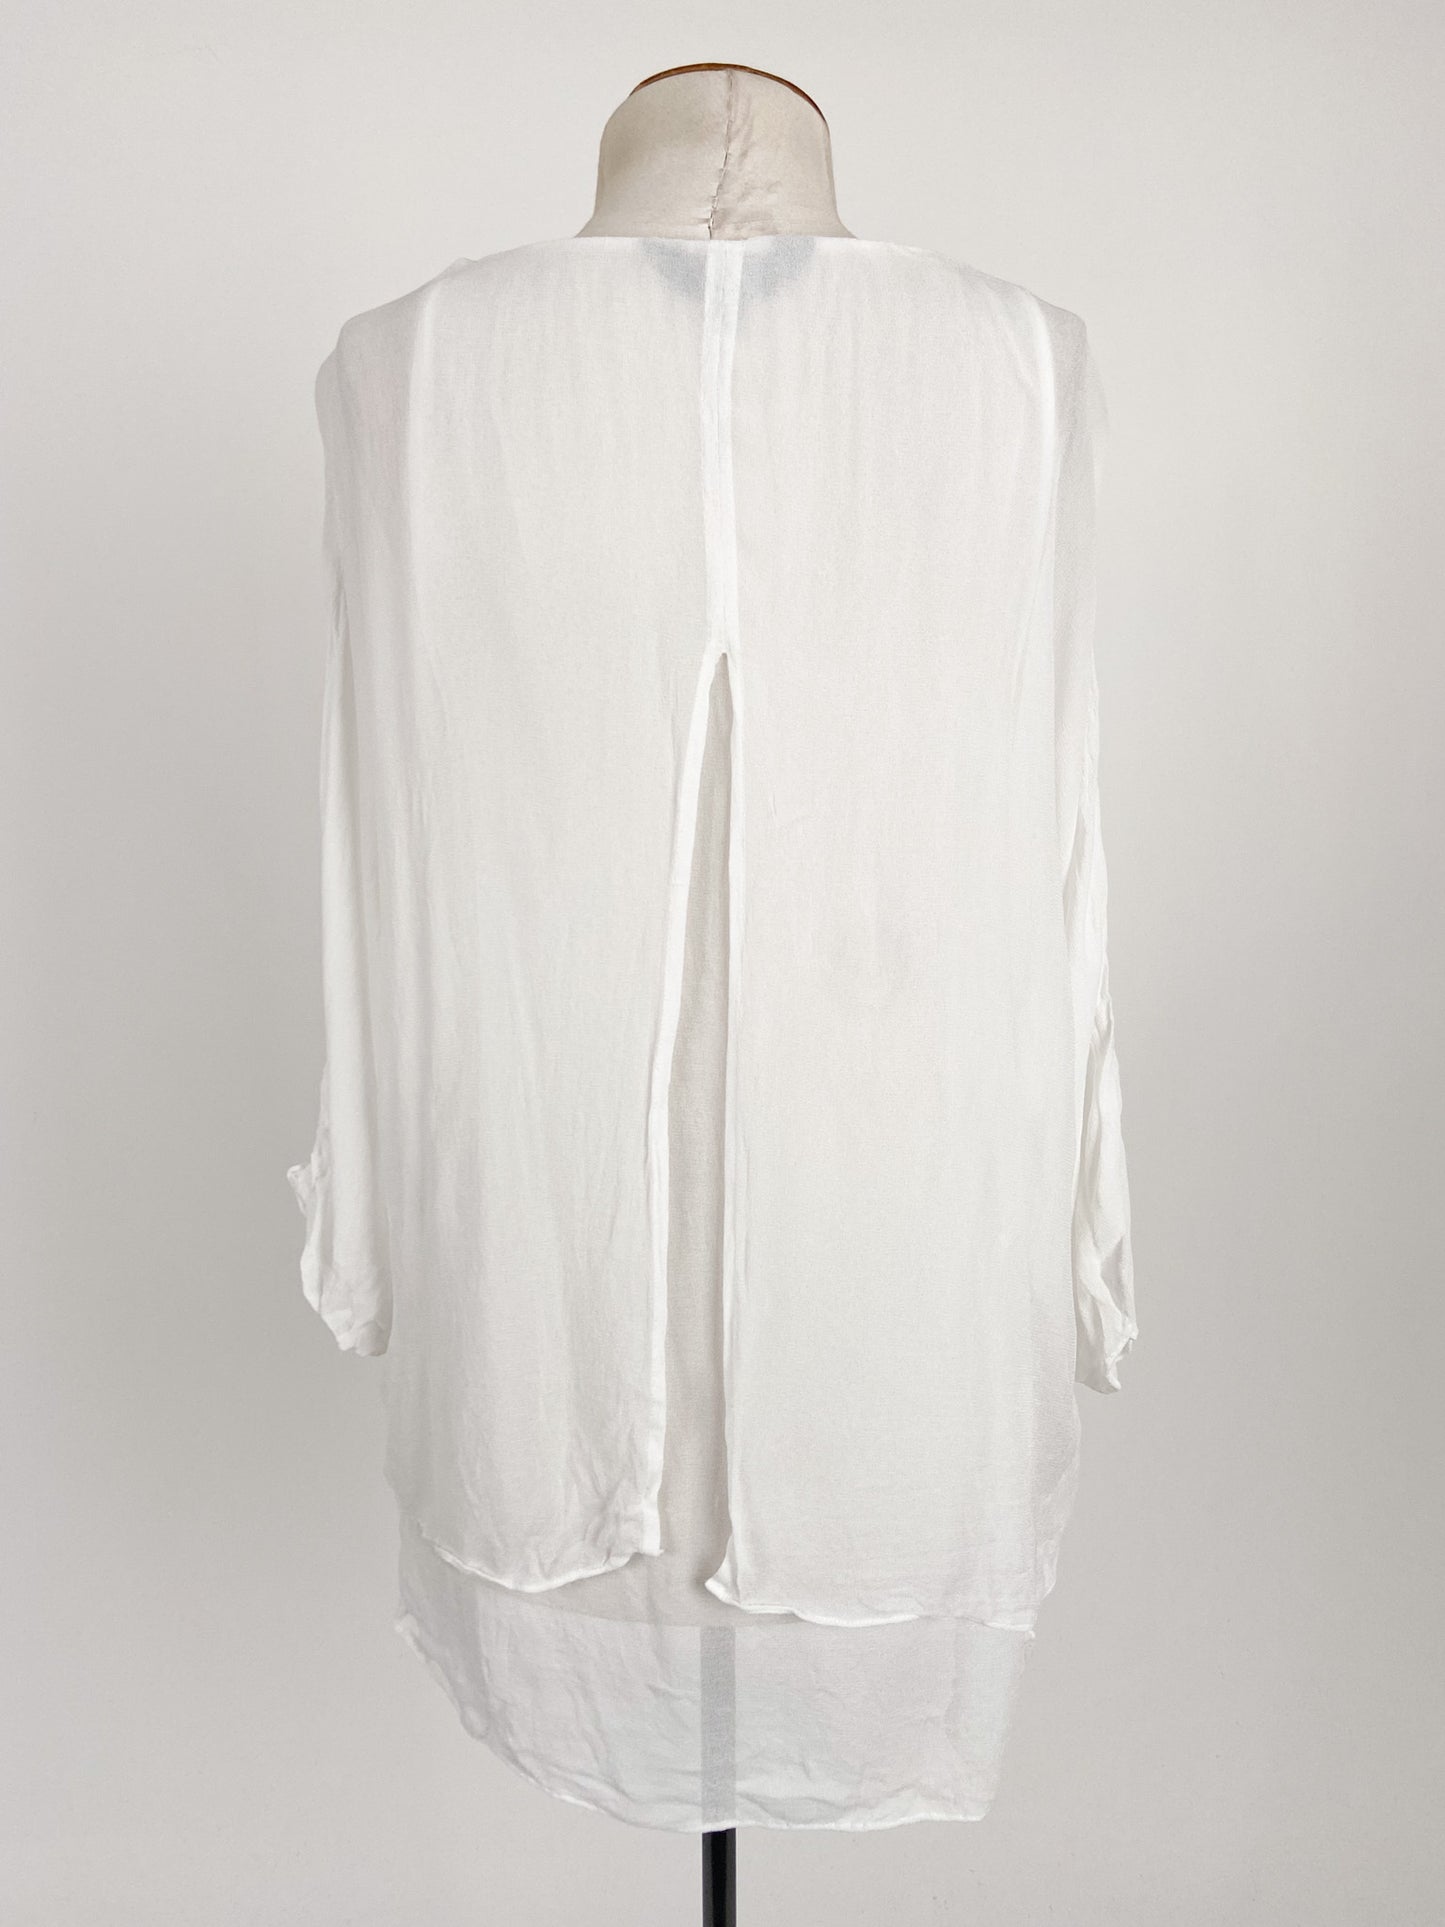 Max | White Casual/Workwear Top | Size 8